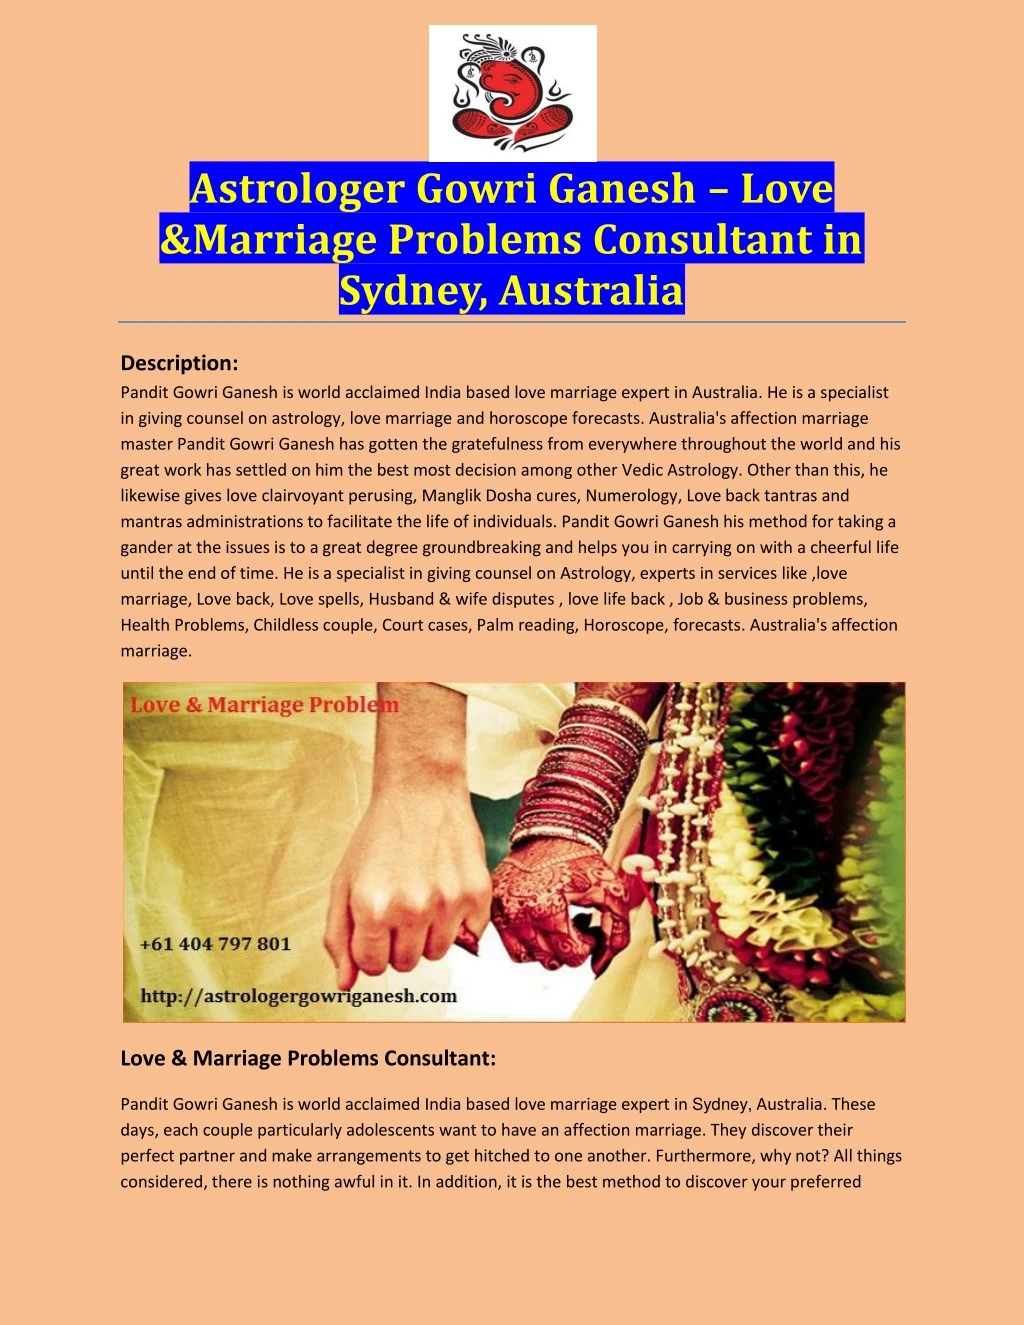 astrologer gowri ganesh love marriage problems